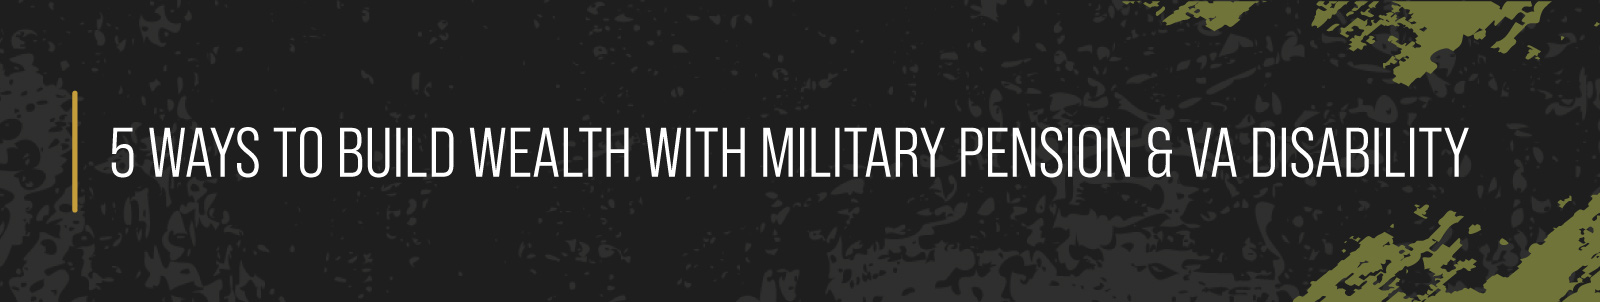 5 Ways to Build Wealth With Military Pension & VA Disability 